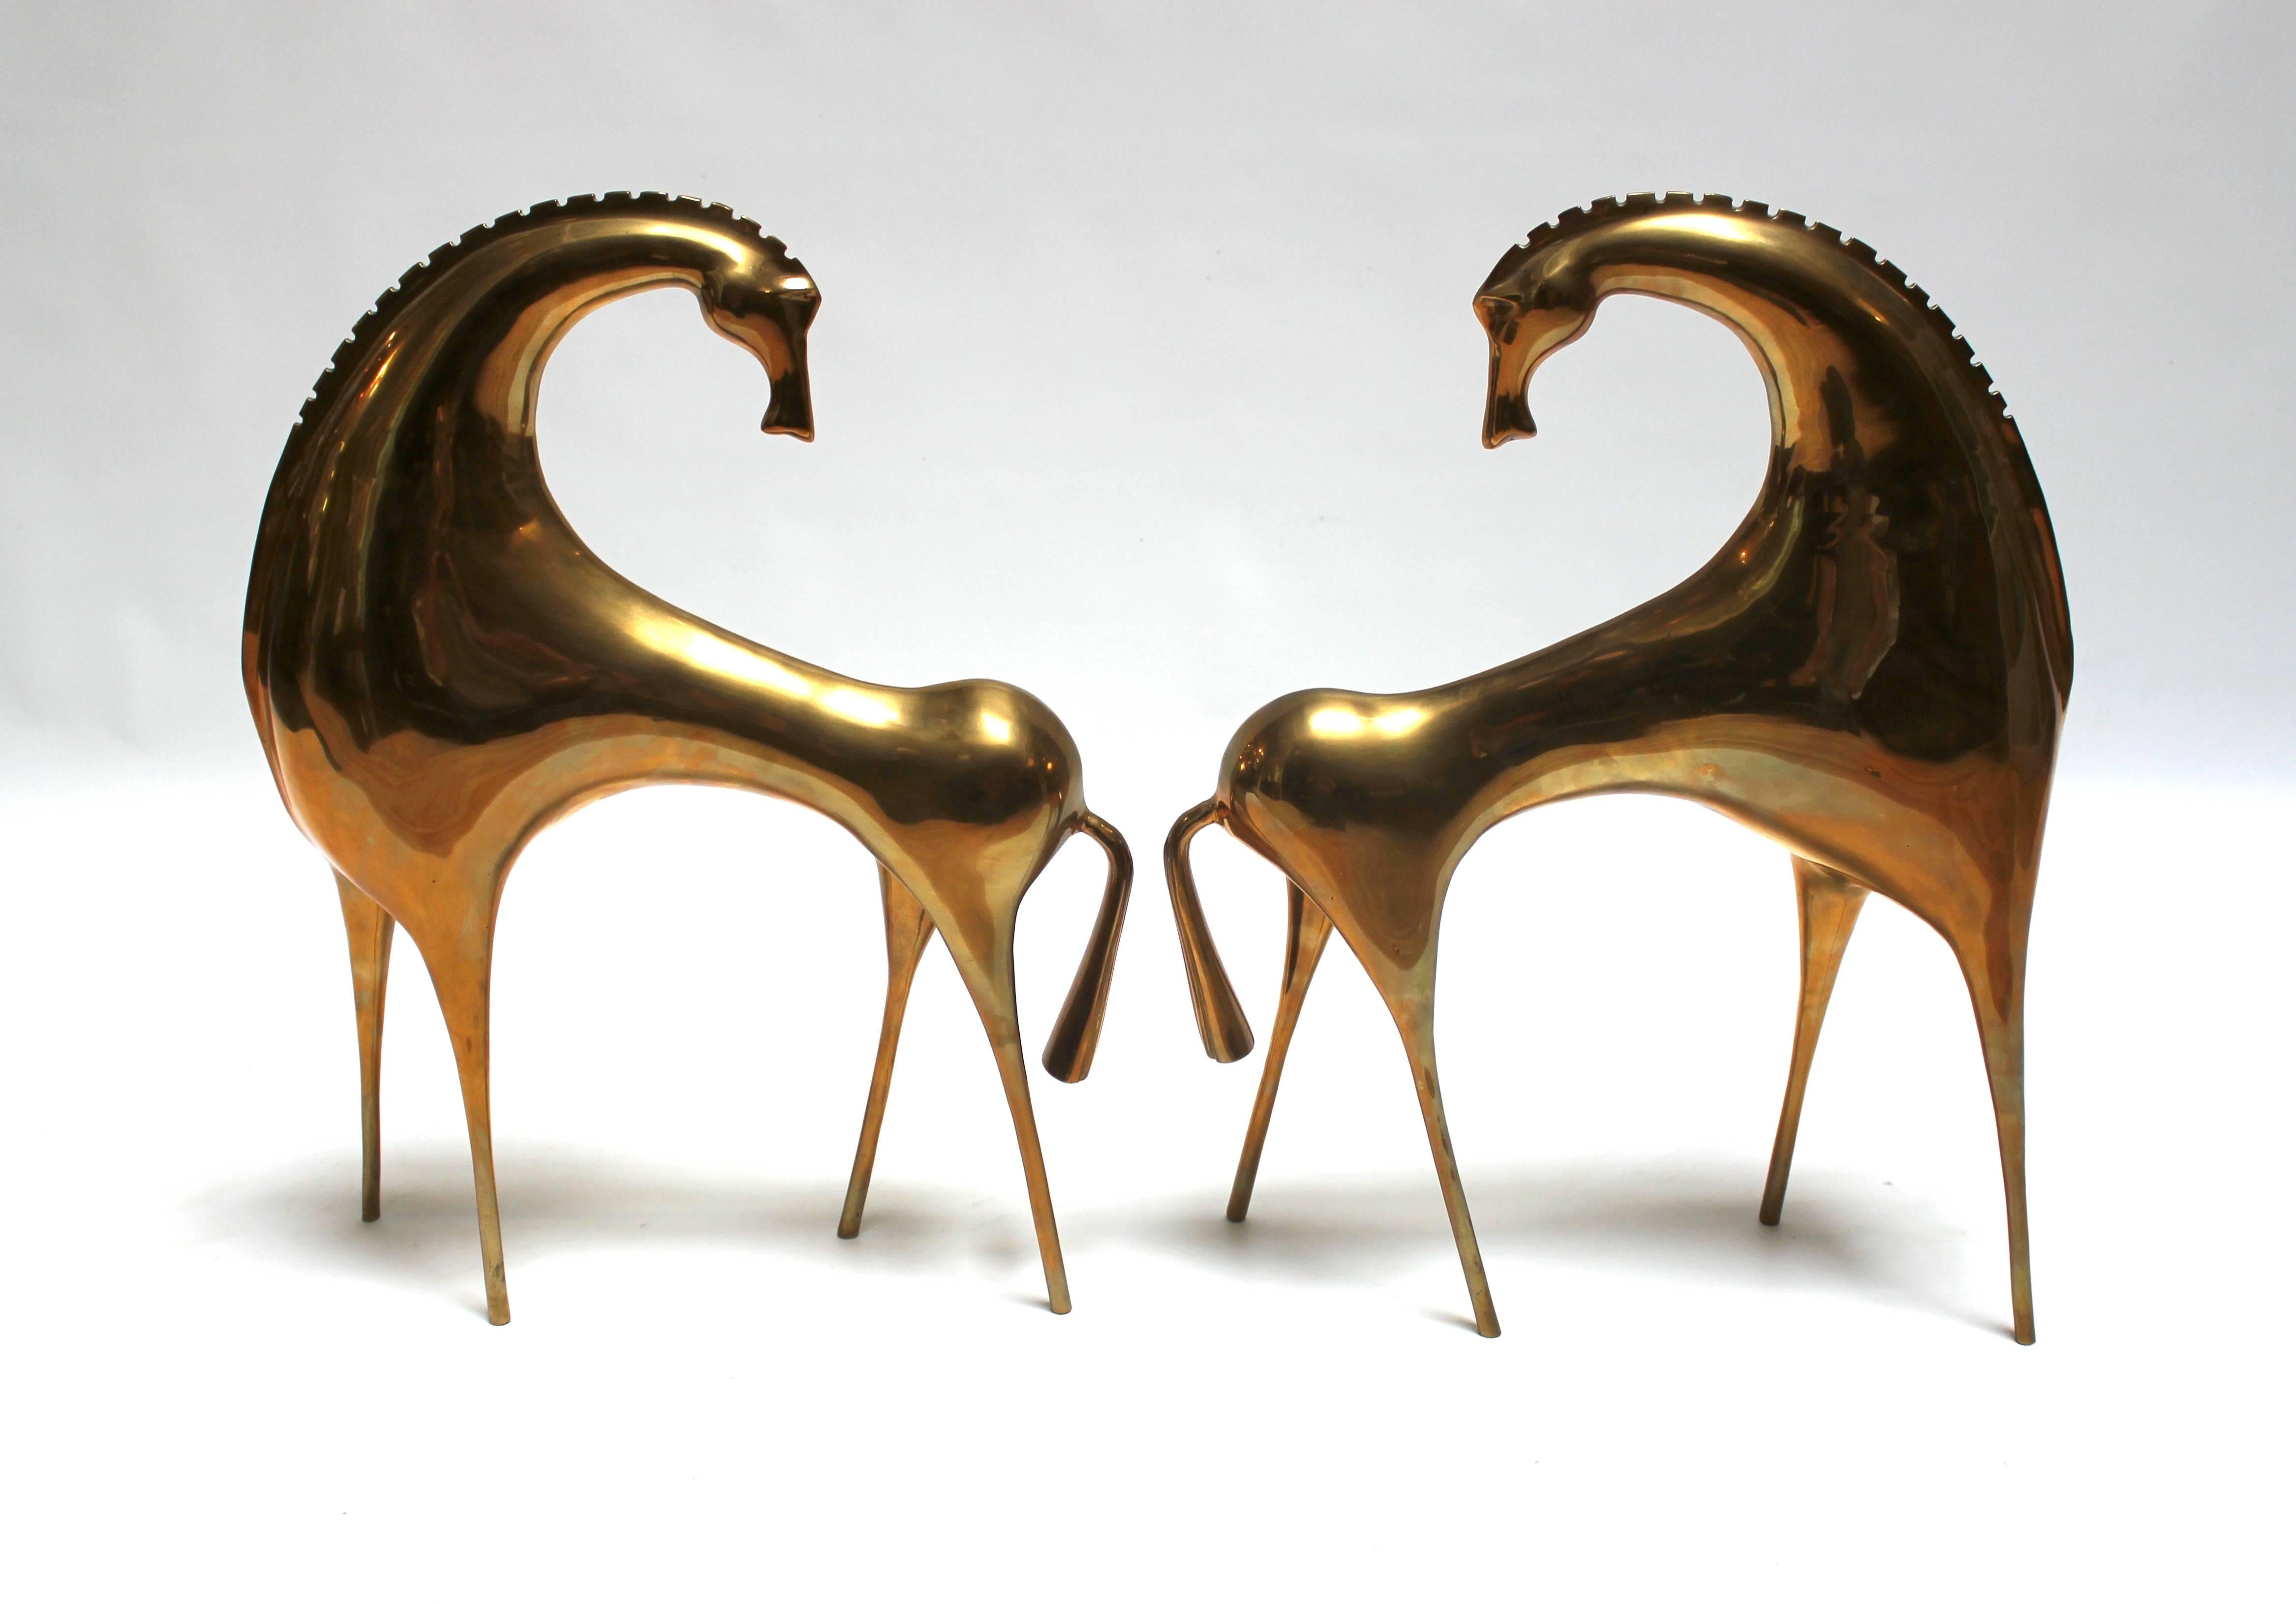 Pair of early 1980s sculptural brass horses, similar in style to Frederick Weinberg. Very striking, somewhat abstracted design, with elements of Mid-Century, Hollywood Regency, and Postmodernism. Price is for the pair.